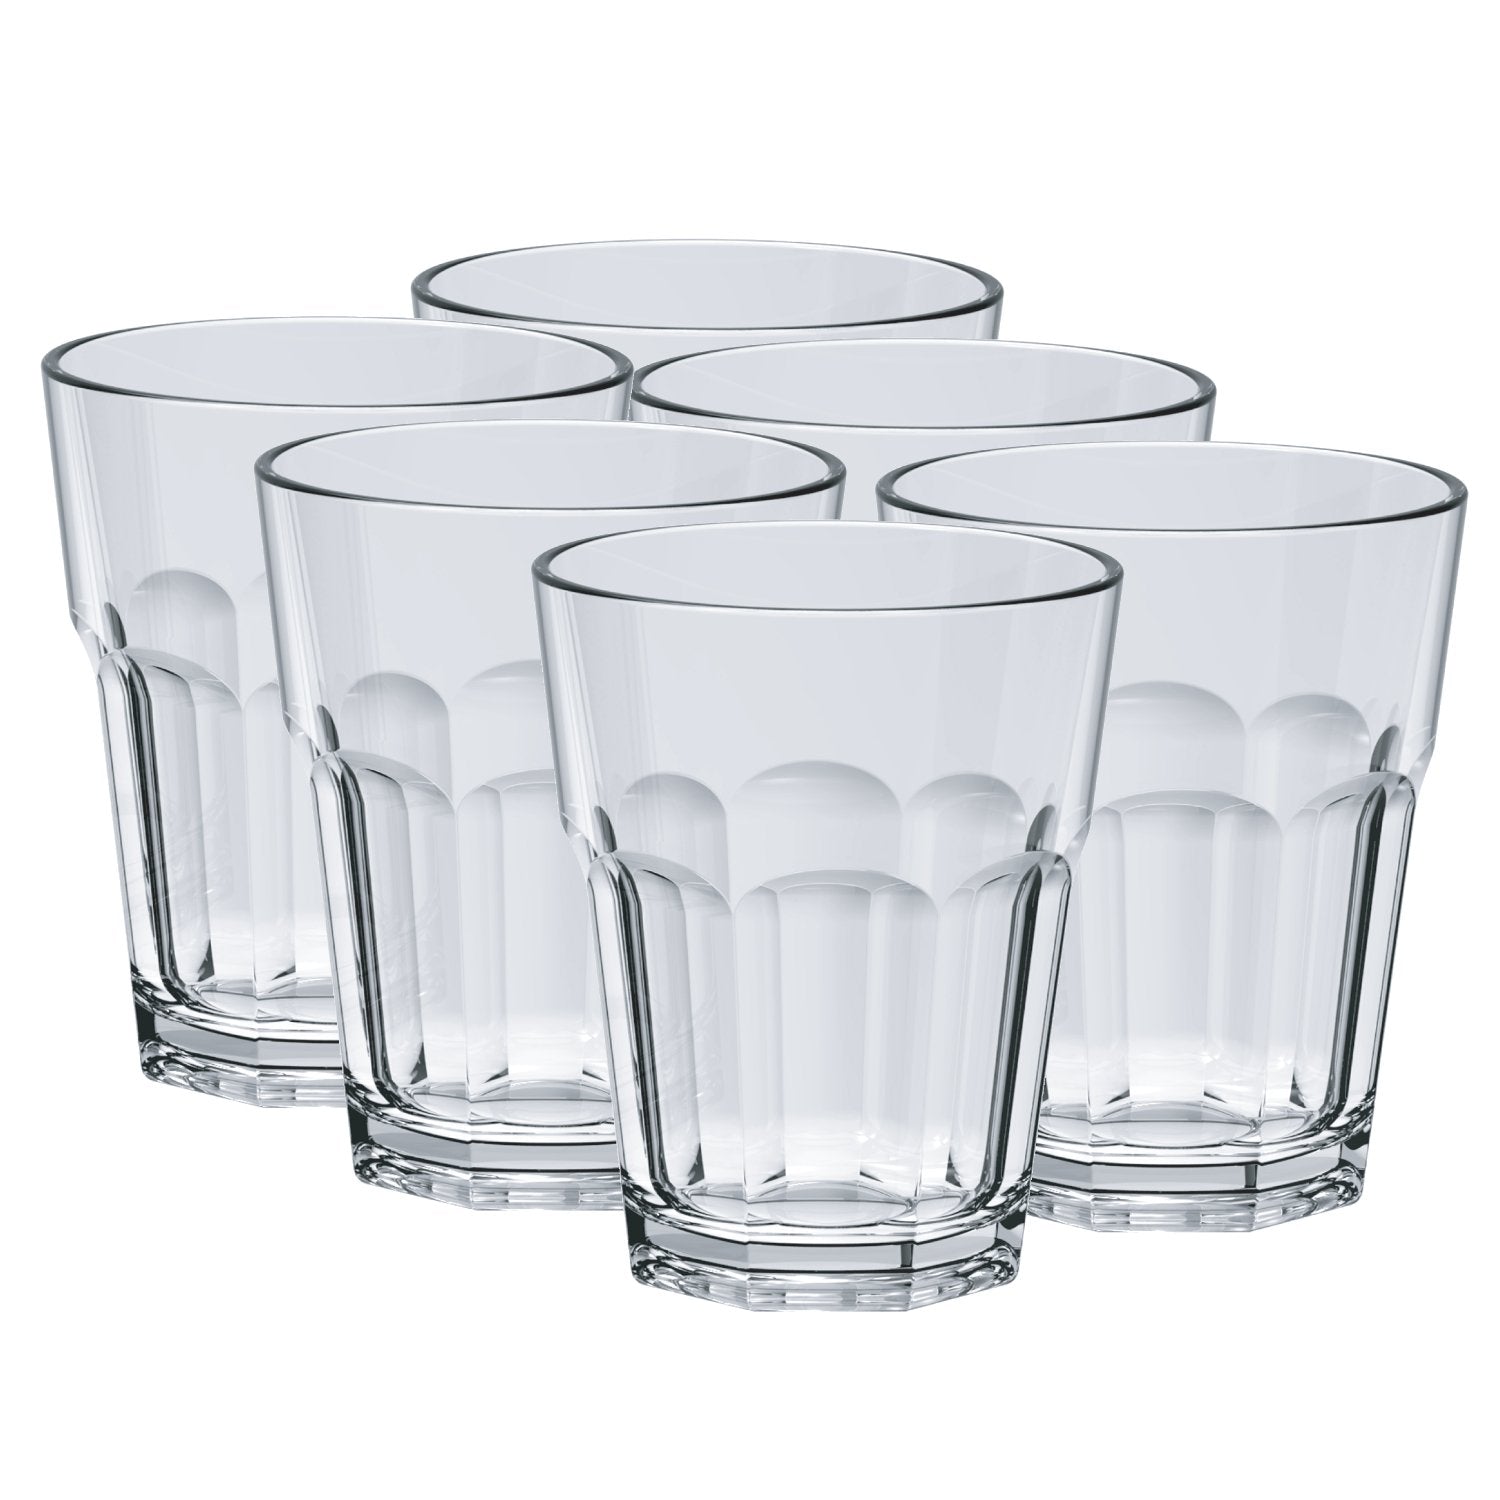 Plastic Tumblers Drinking Glasses Set of 2 Clear,Acrylic Cups For Kitchen -  Unbreakable, BPA Free, Dishwasher Safe Plastic Glass